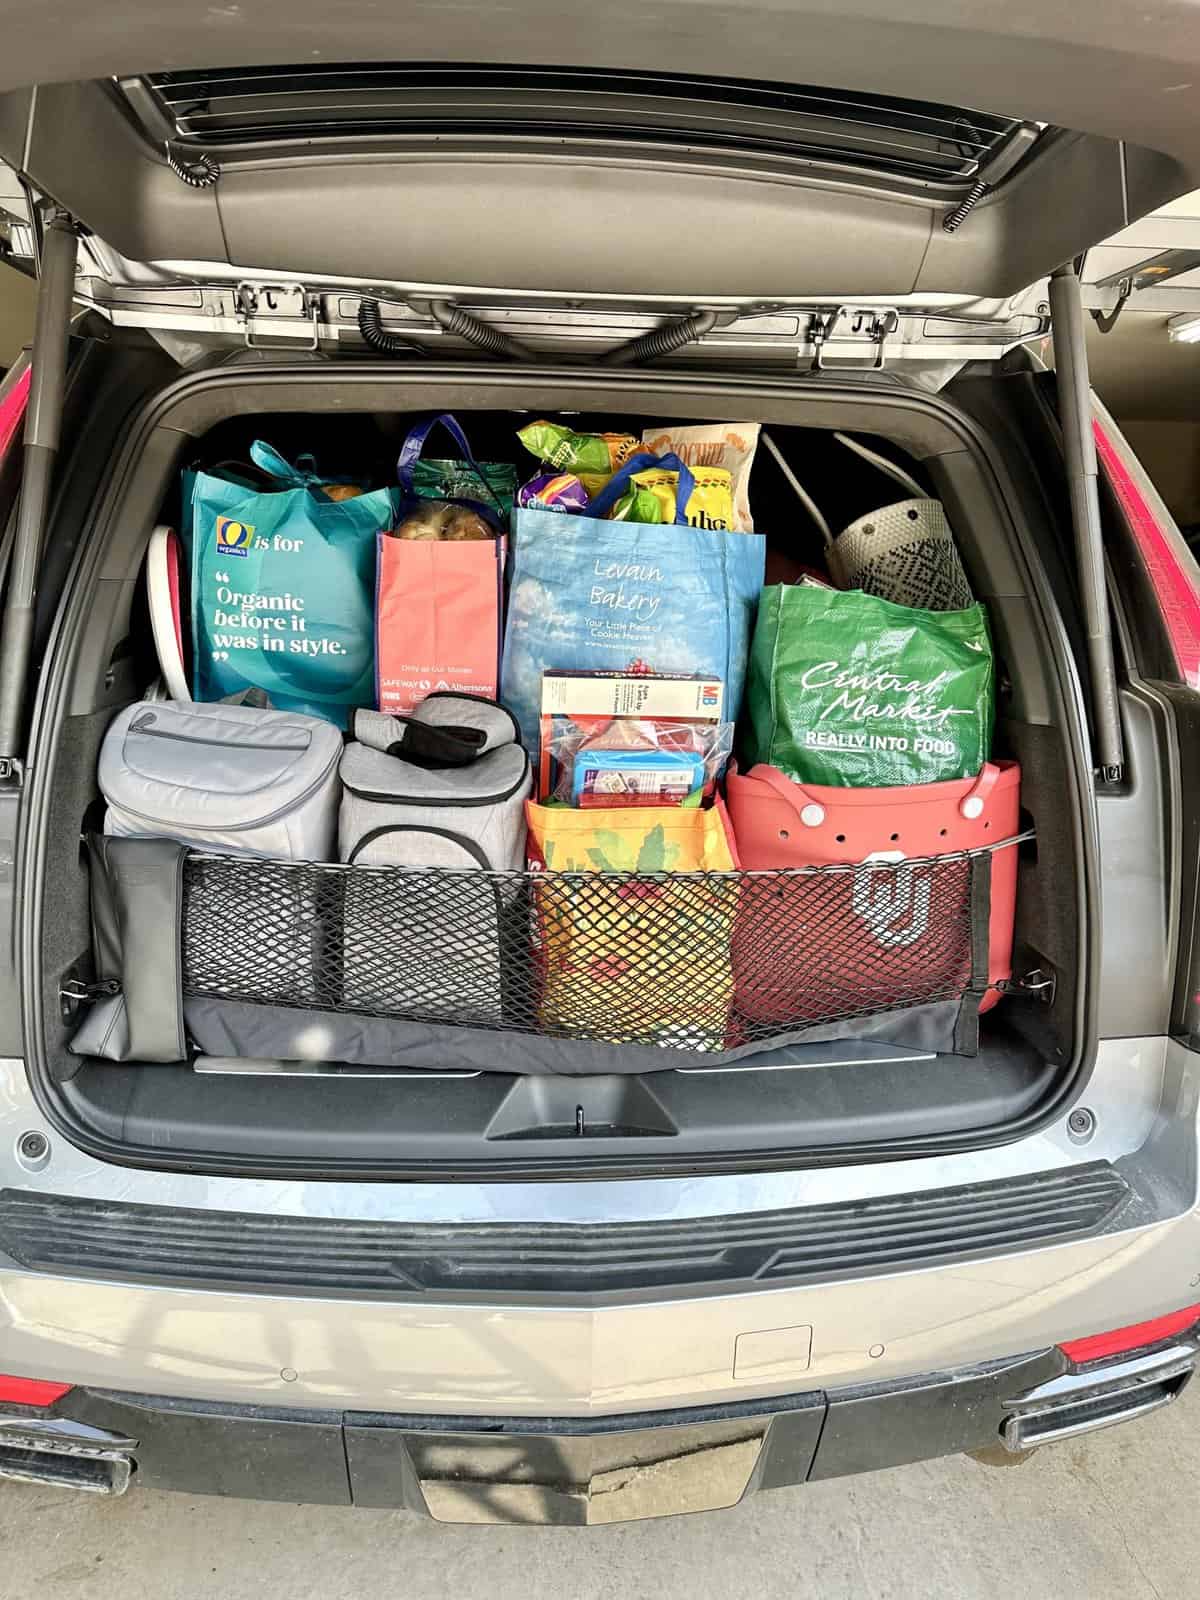 The back of an SUV loaded up with bags of groceries and coolers.